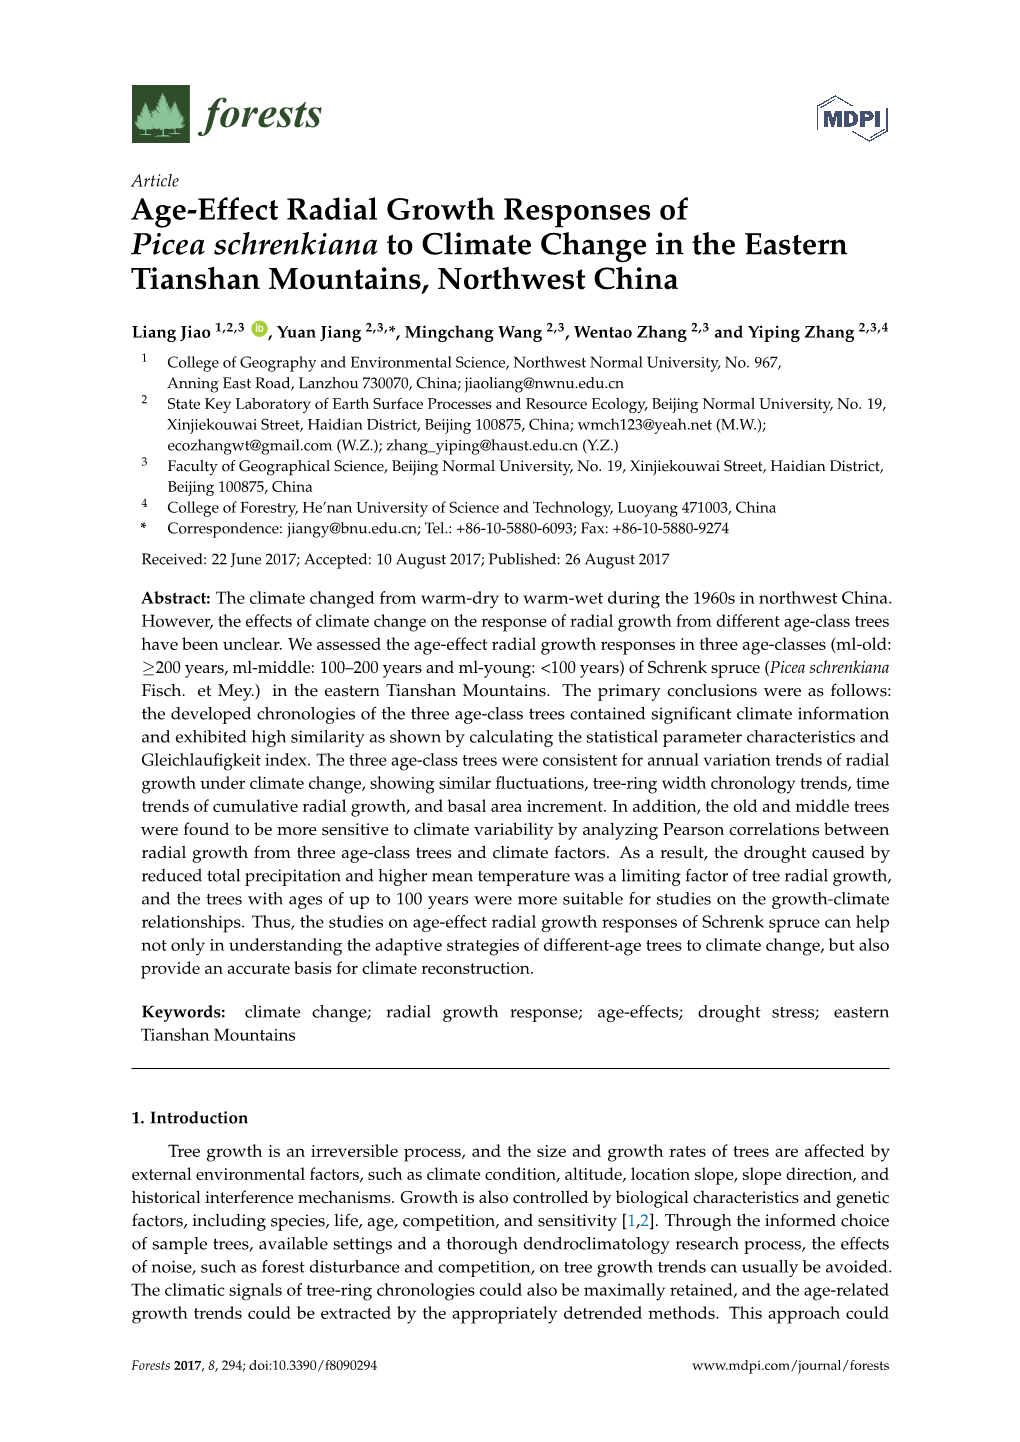 Age-Effect Radial Growth Responses of Picea Schrenkiana to Climate Change in the Eastern Tianshan Mountains, Northwest China